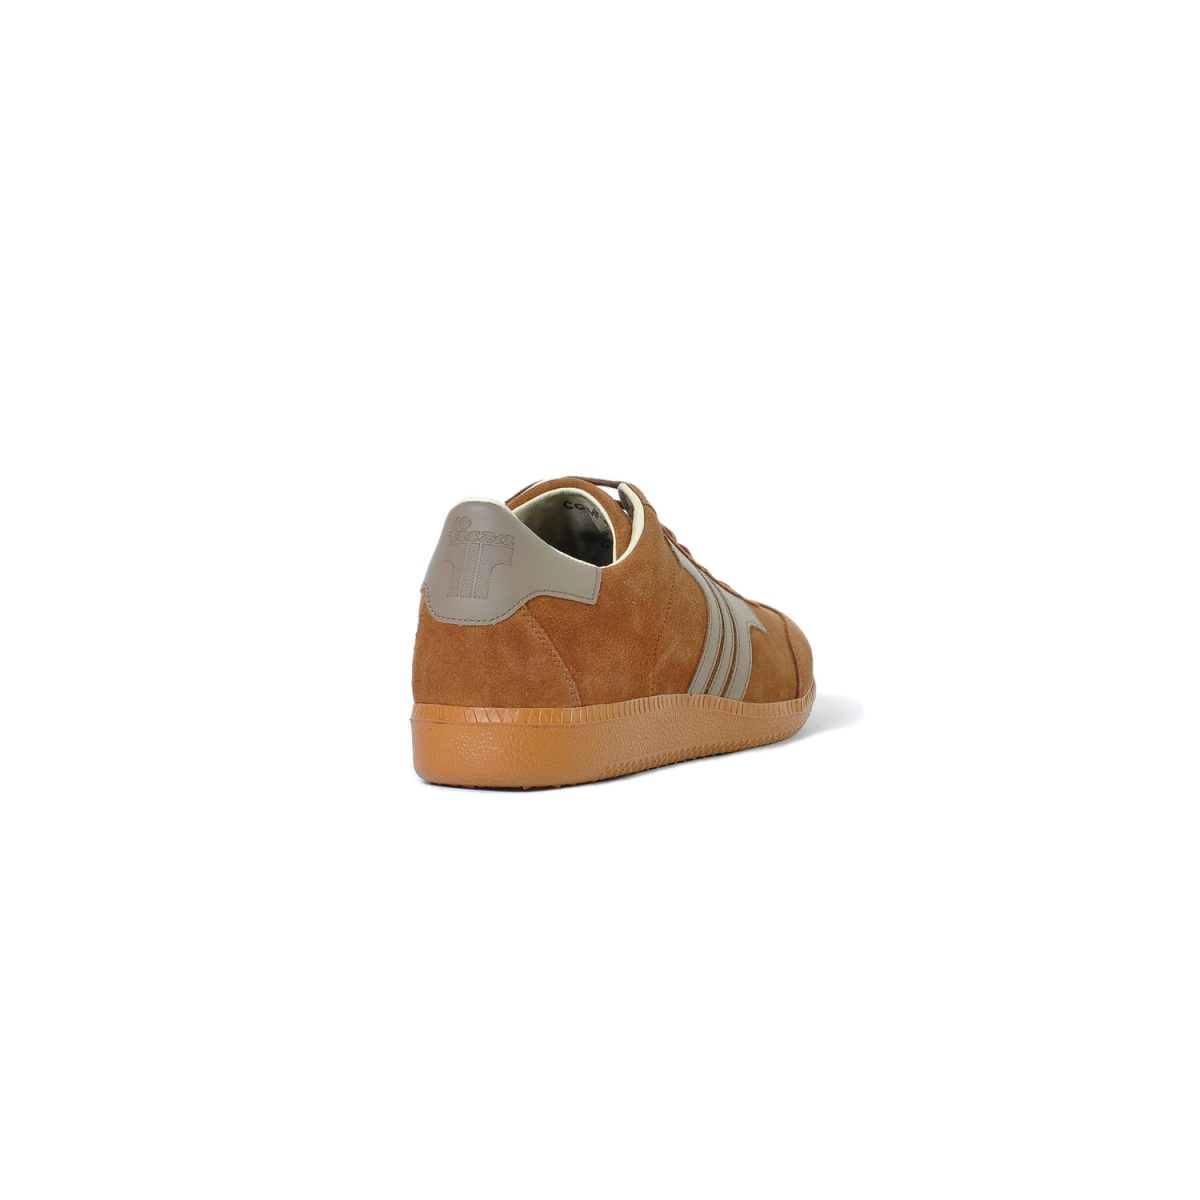 Tisza shoes - Comfort - Rust-earth